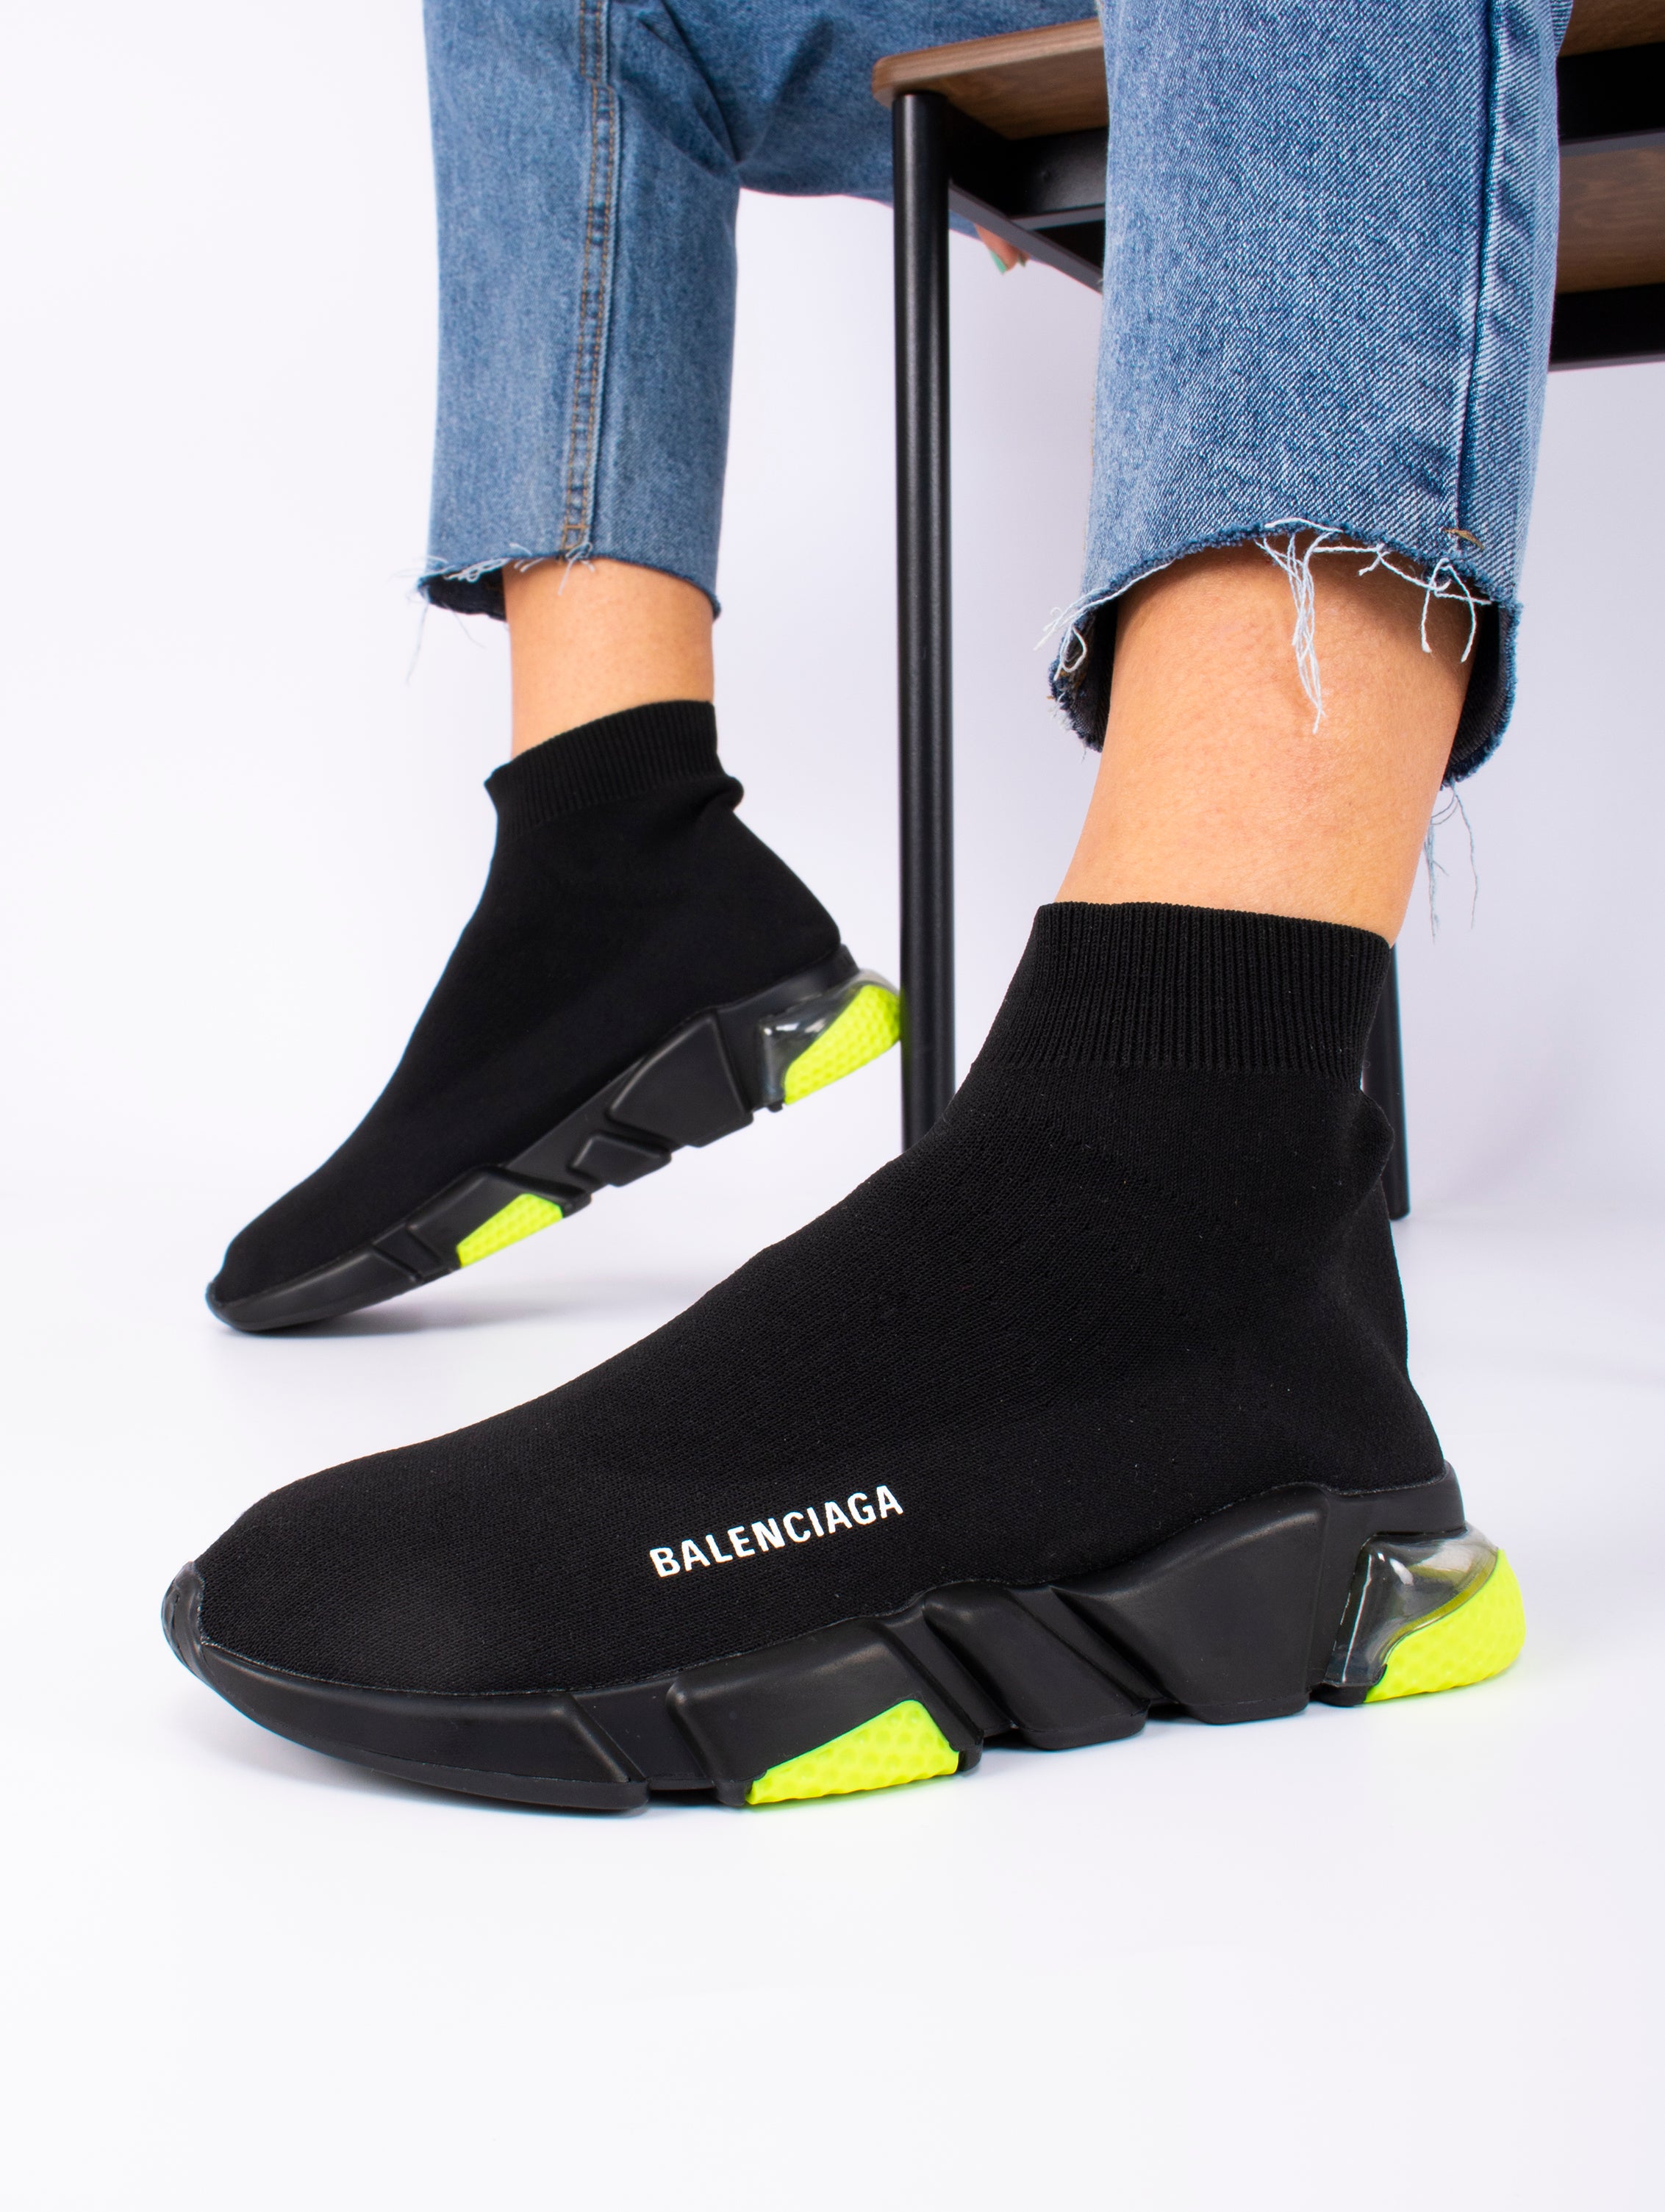 Balenciaga Speed Trainer with yellow base